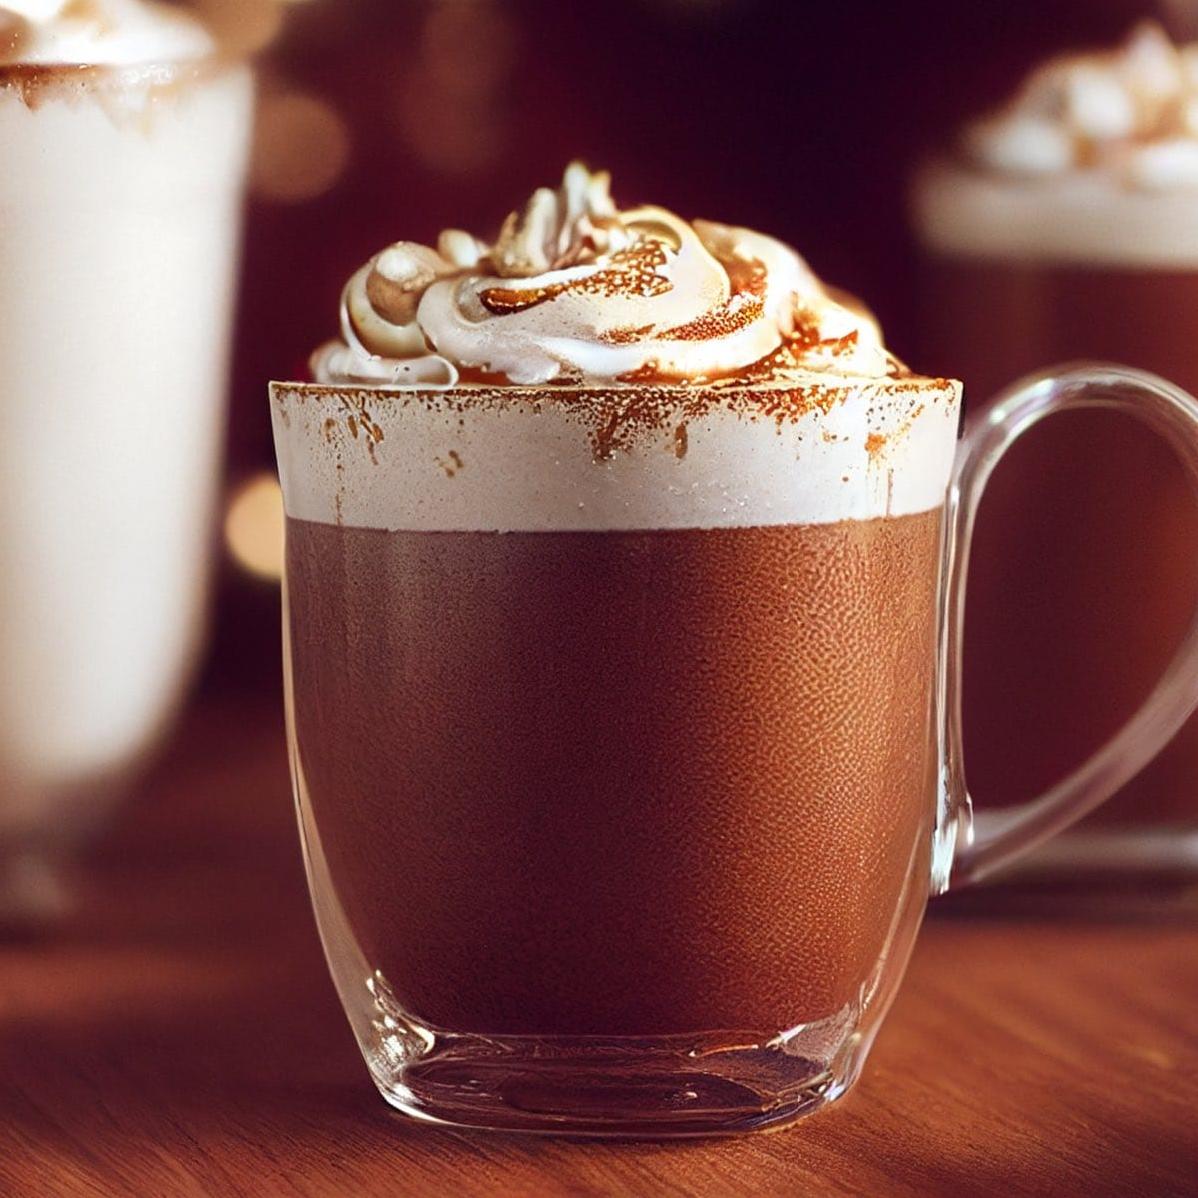  Get ready to fall in love with a festive twist on your favorite caffeinated beverage.